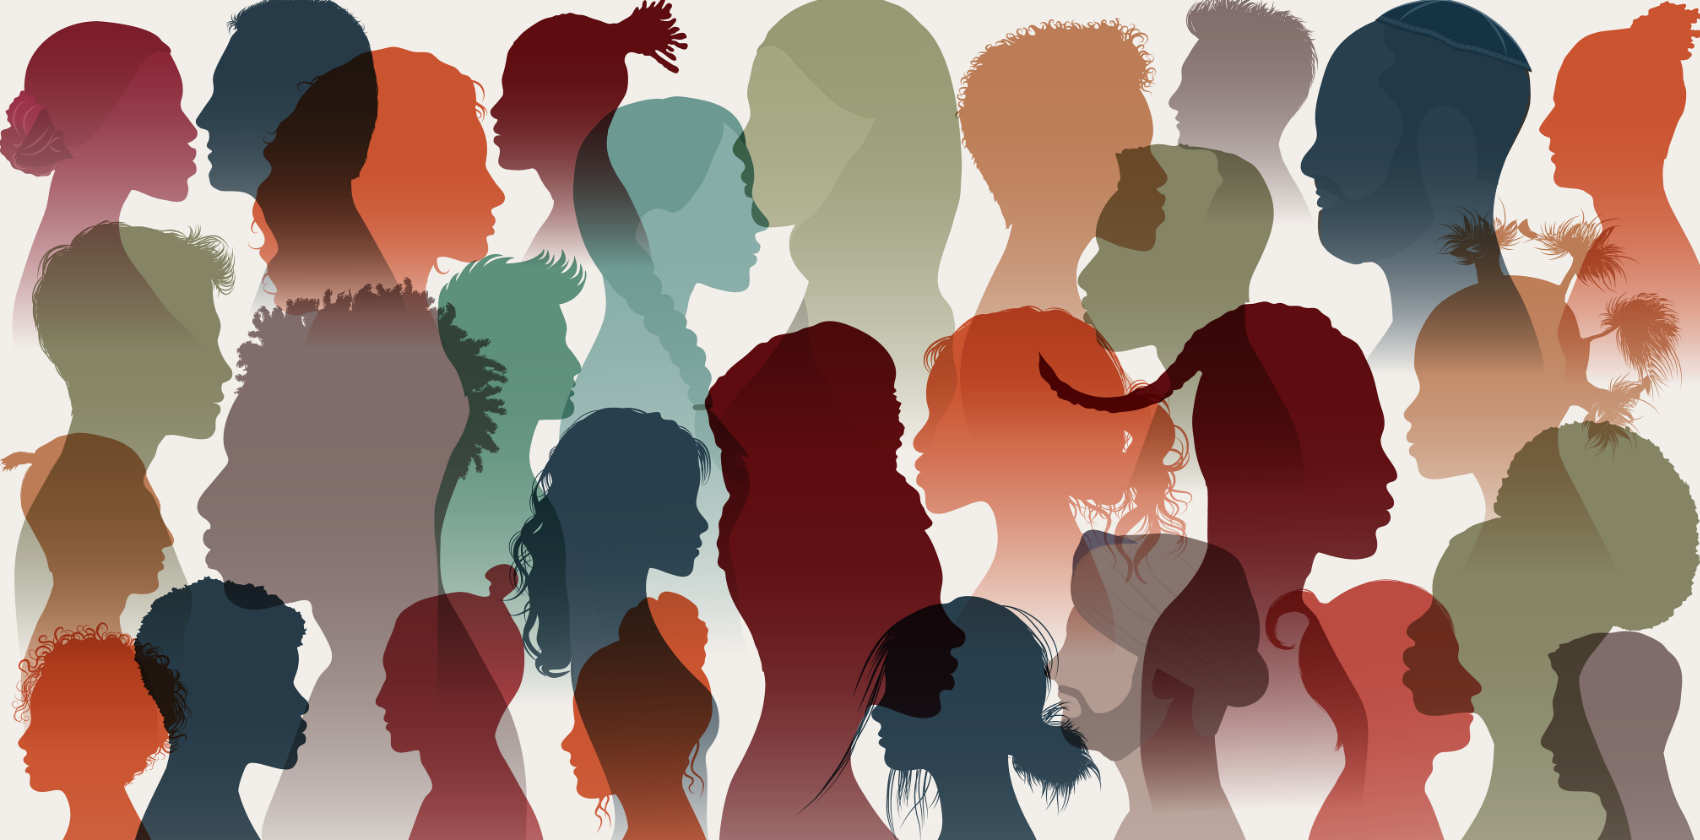 An abstract graphic of silhouettes of different people in a variety of earth toned colors